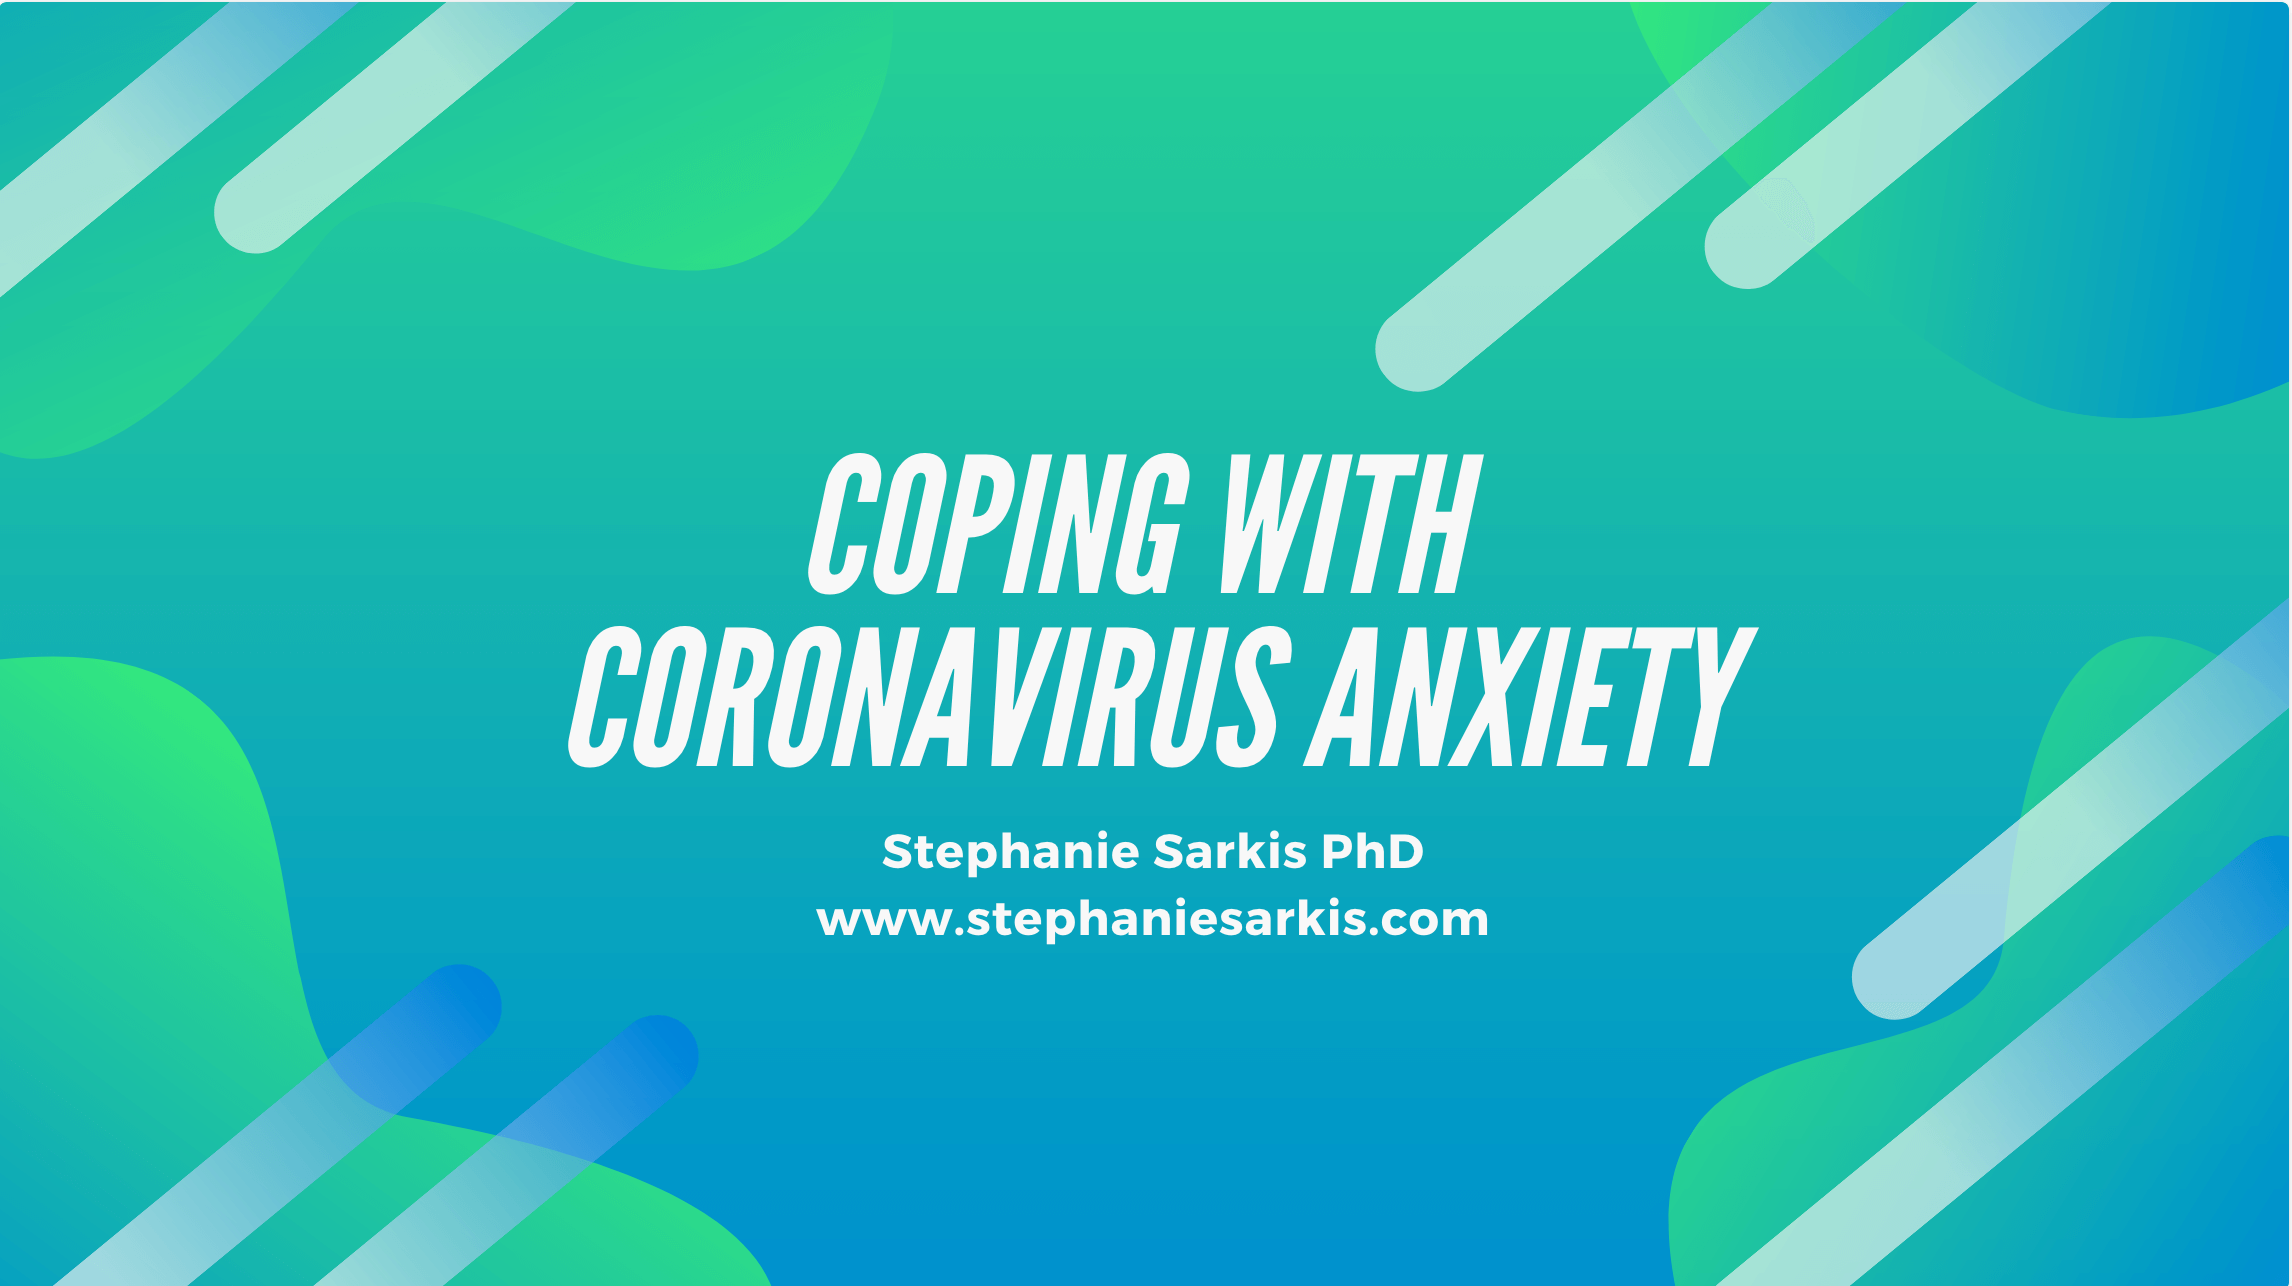 Coping with Anxiety Related to Covid-19 (Coronavirus)